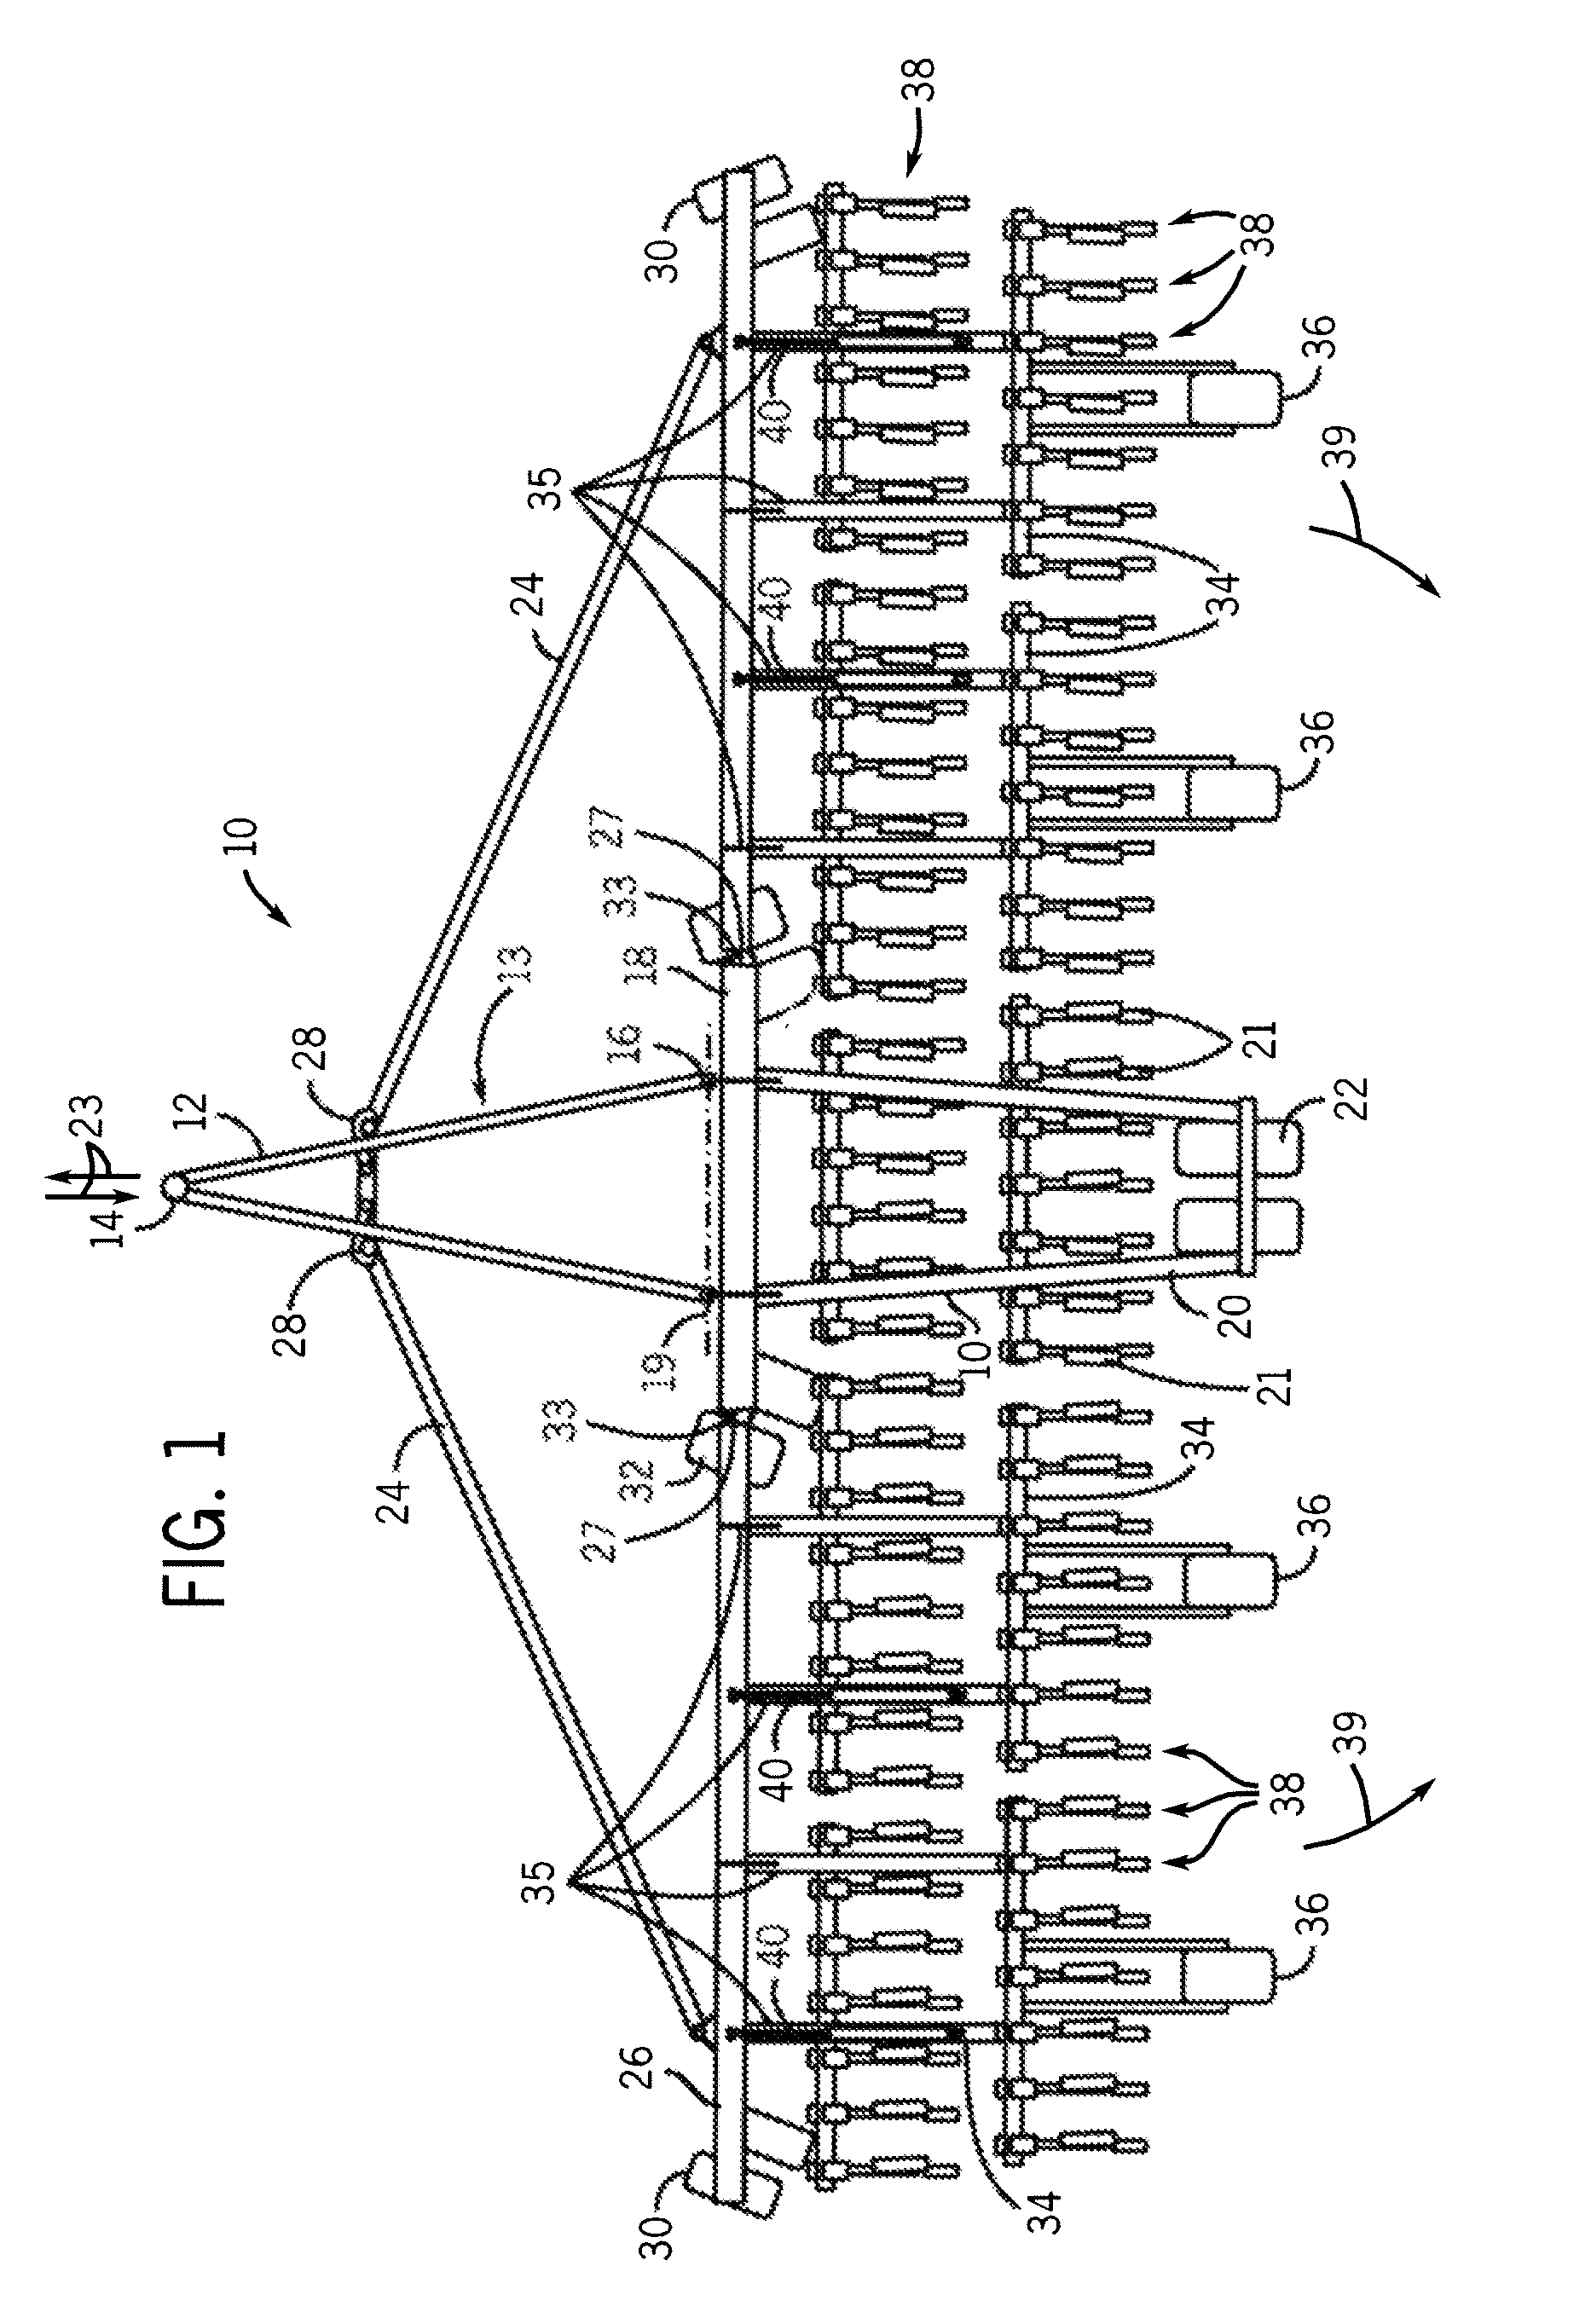 Boom stabilization method for narrow transport implement